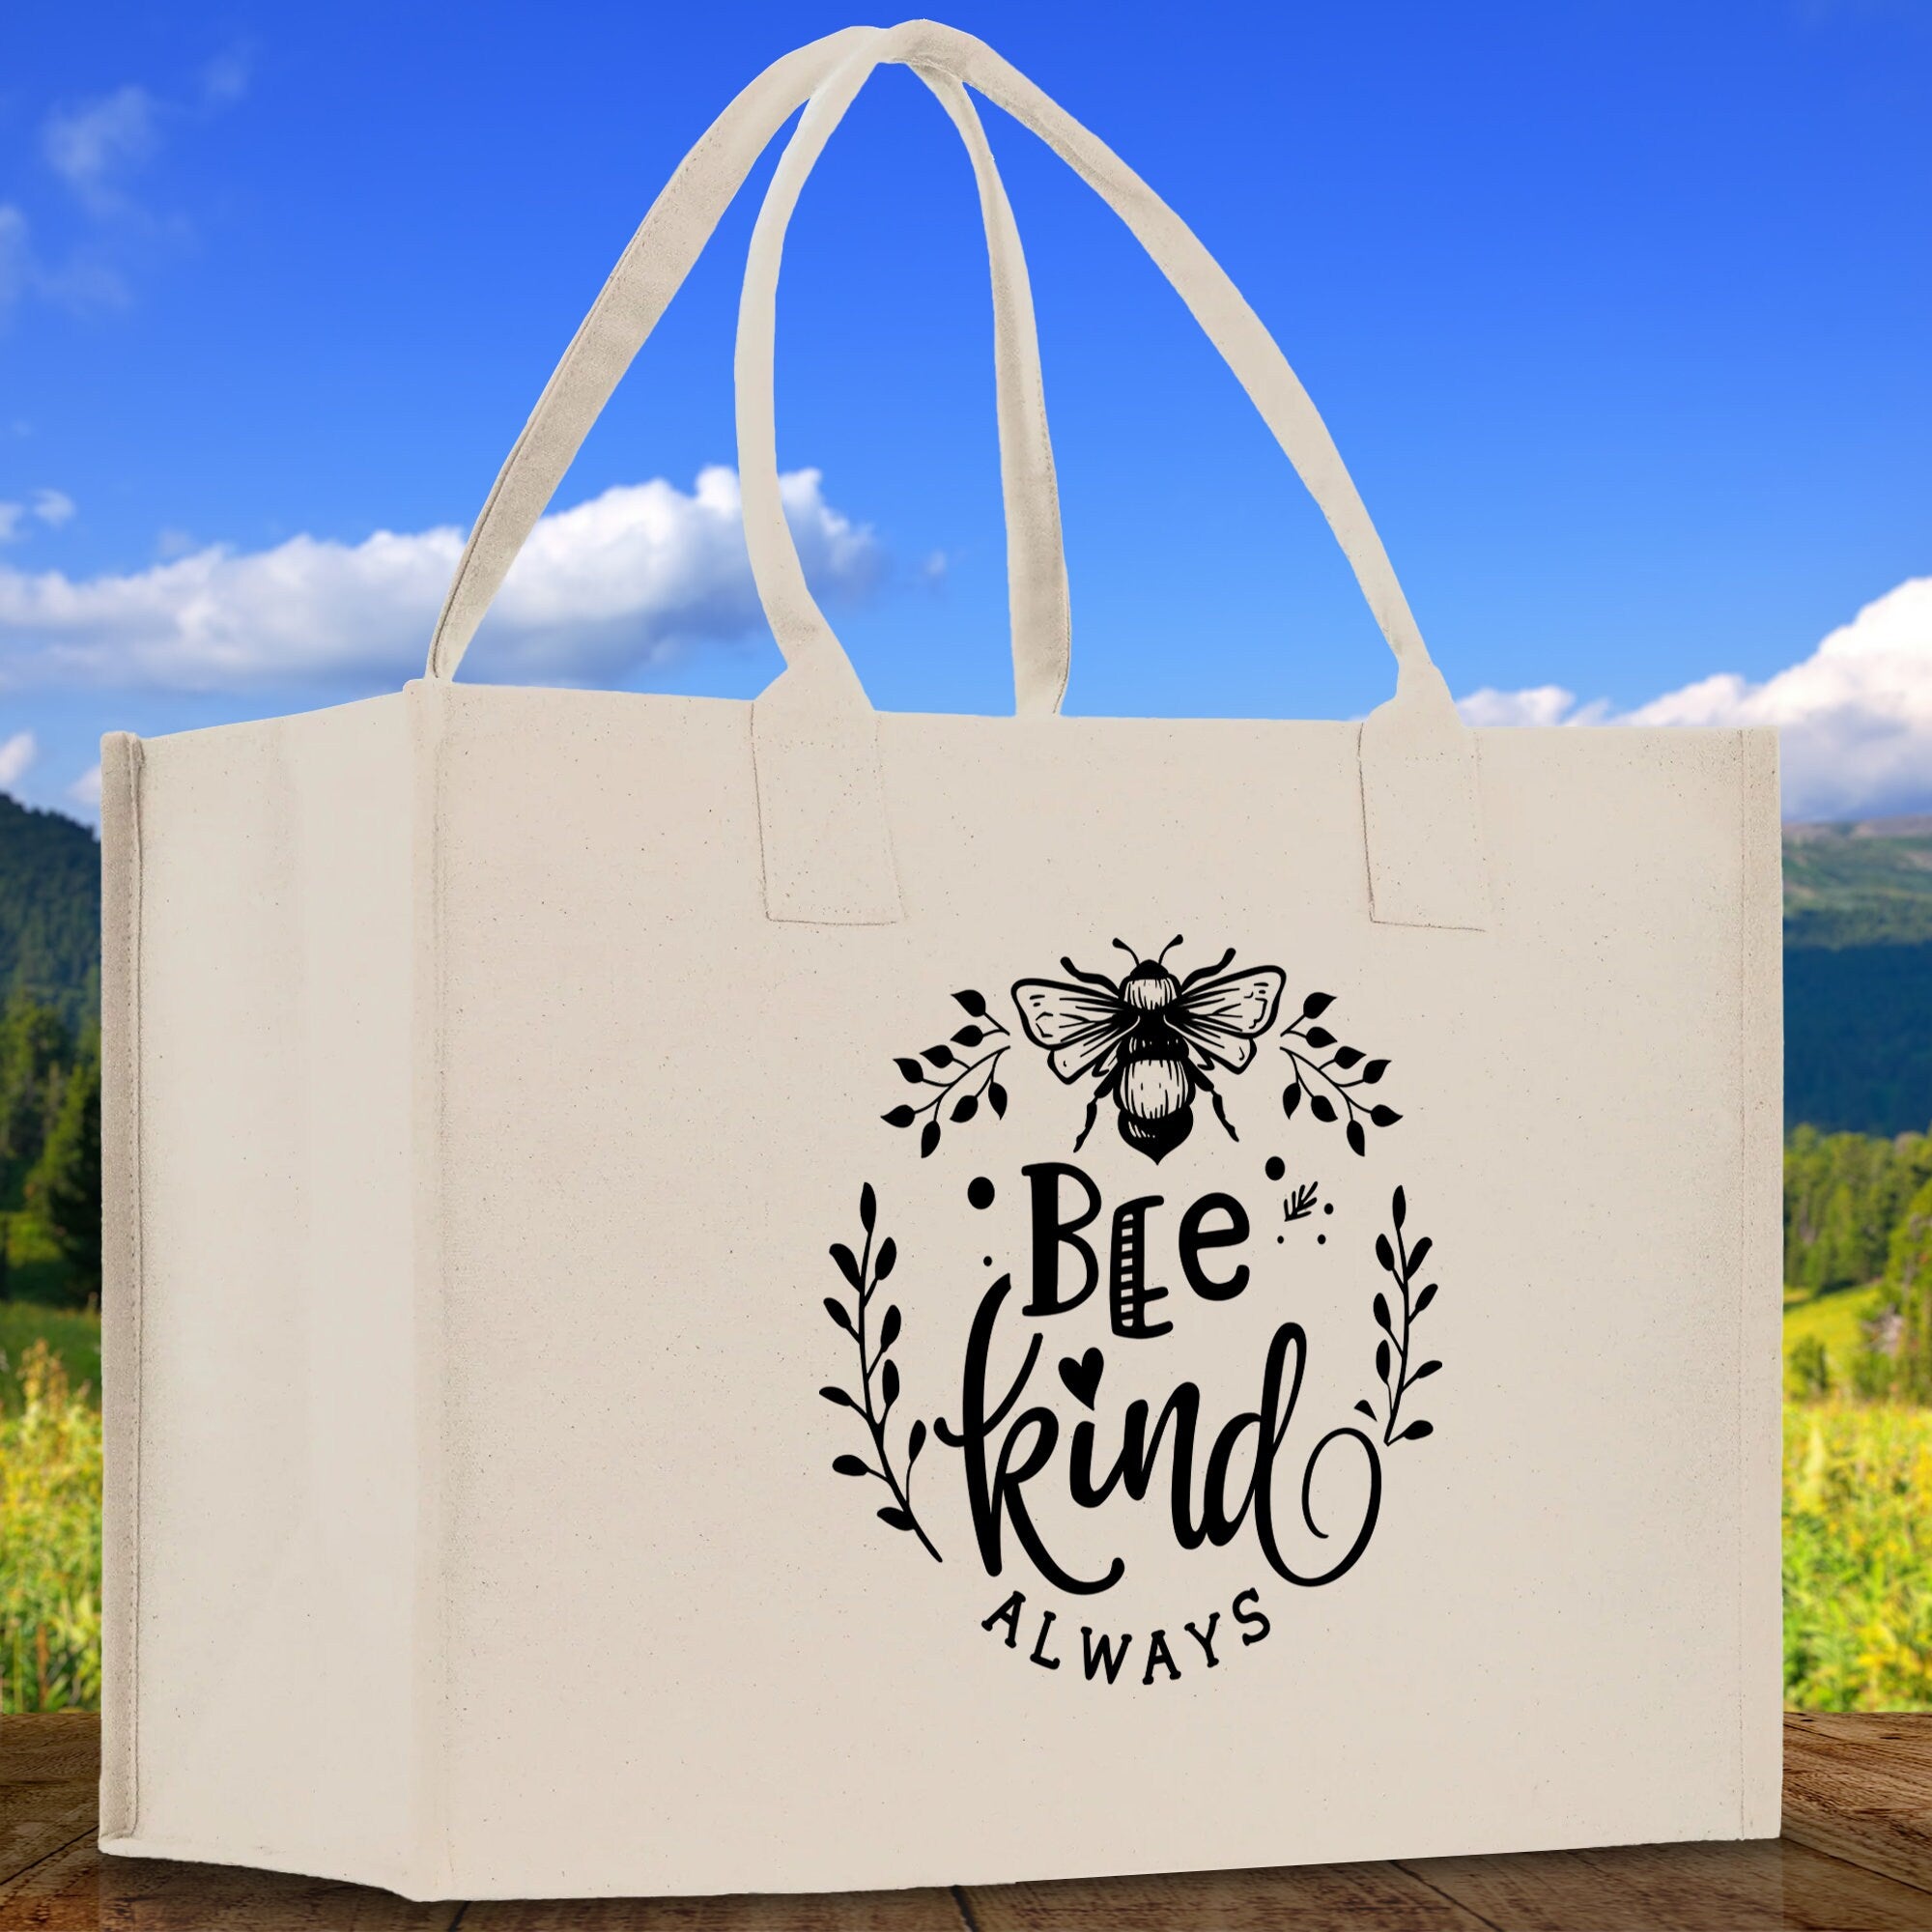 Bee Kind Always Cotton Canvas Tote Bag Nurse Appreciation Gift Bag Gift for Her Birthday Gift Bee Kind Mental Health Matters Save The Bees